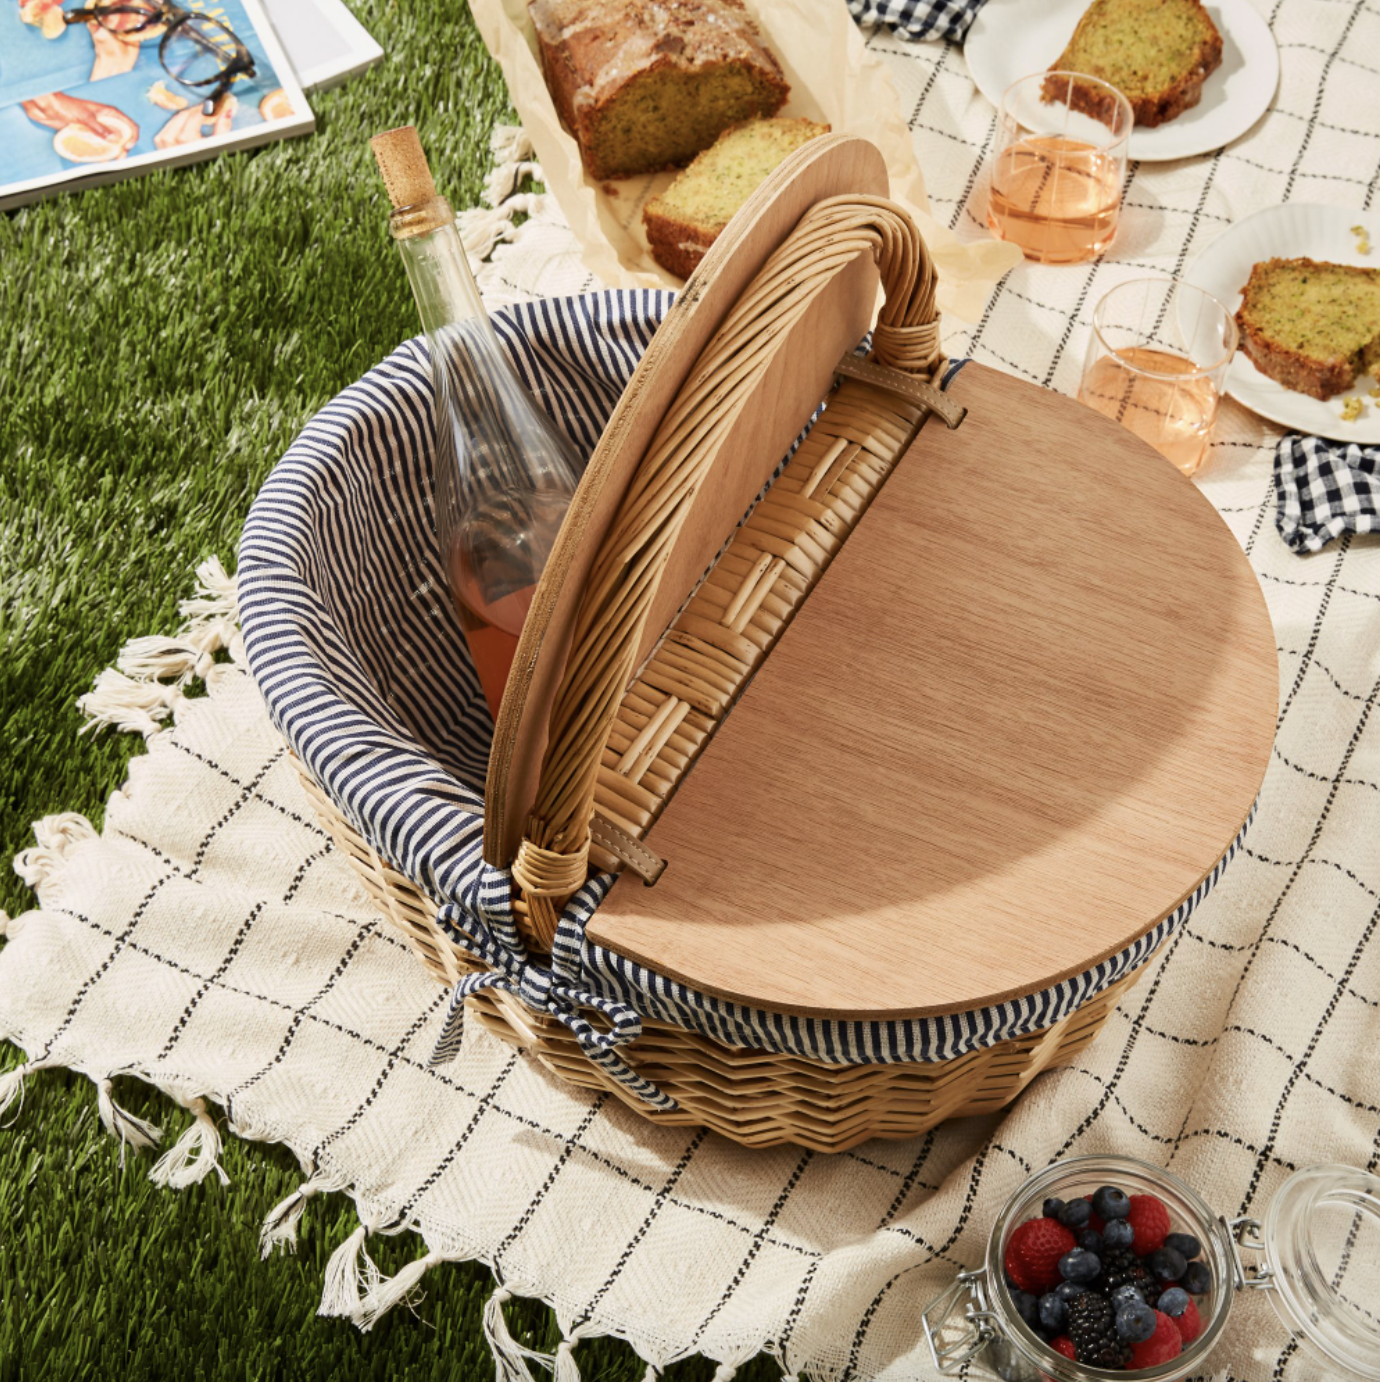 The 8 Best Picnic Baskets in 2022